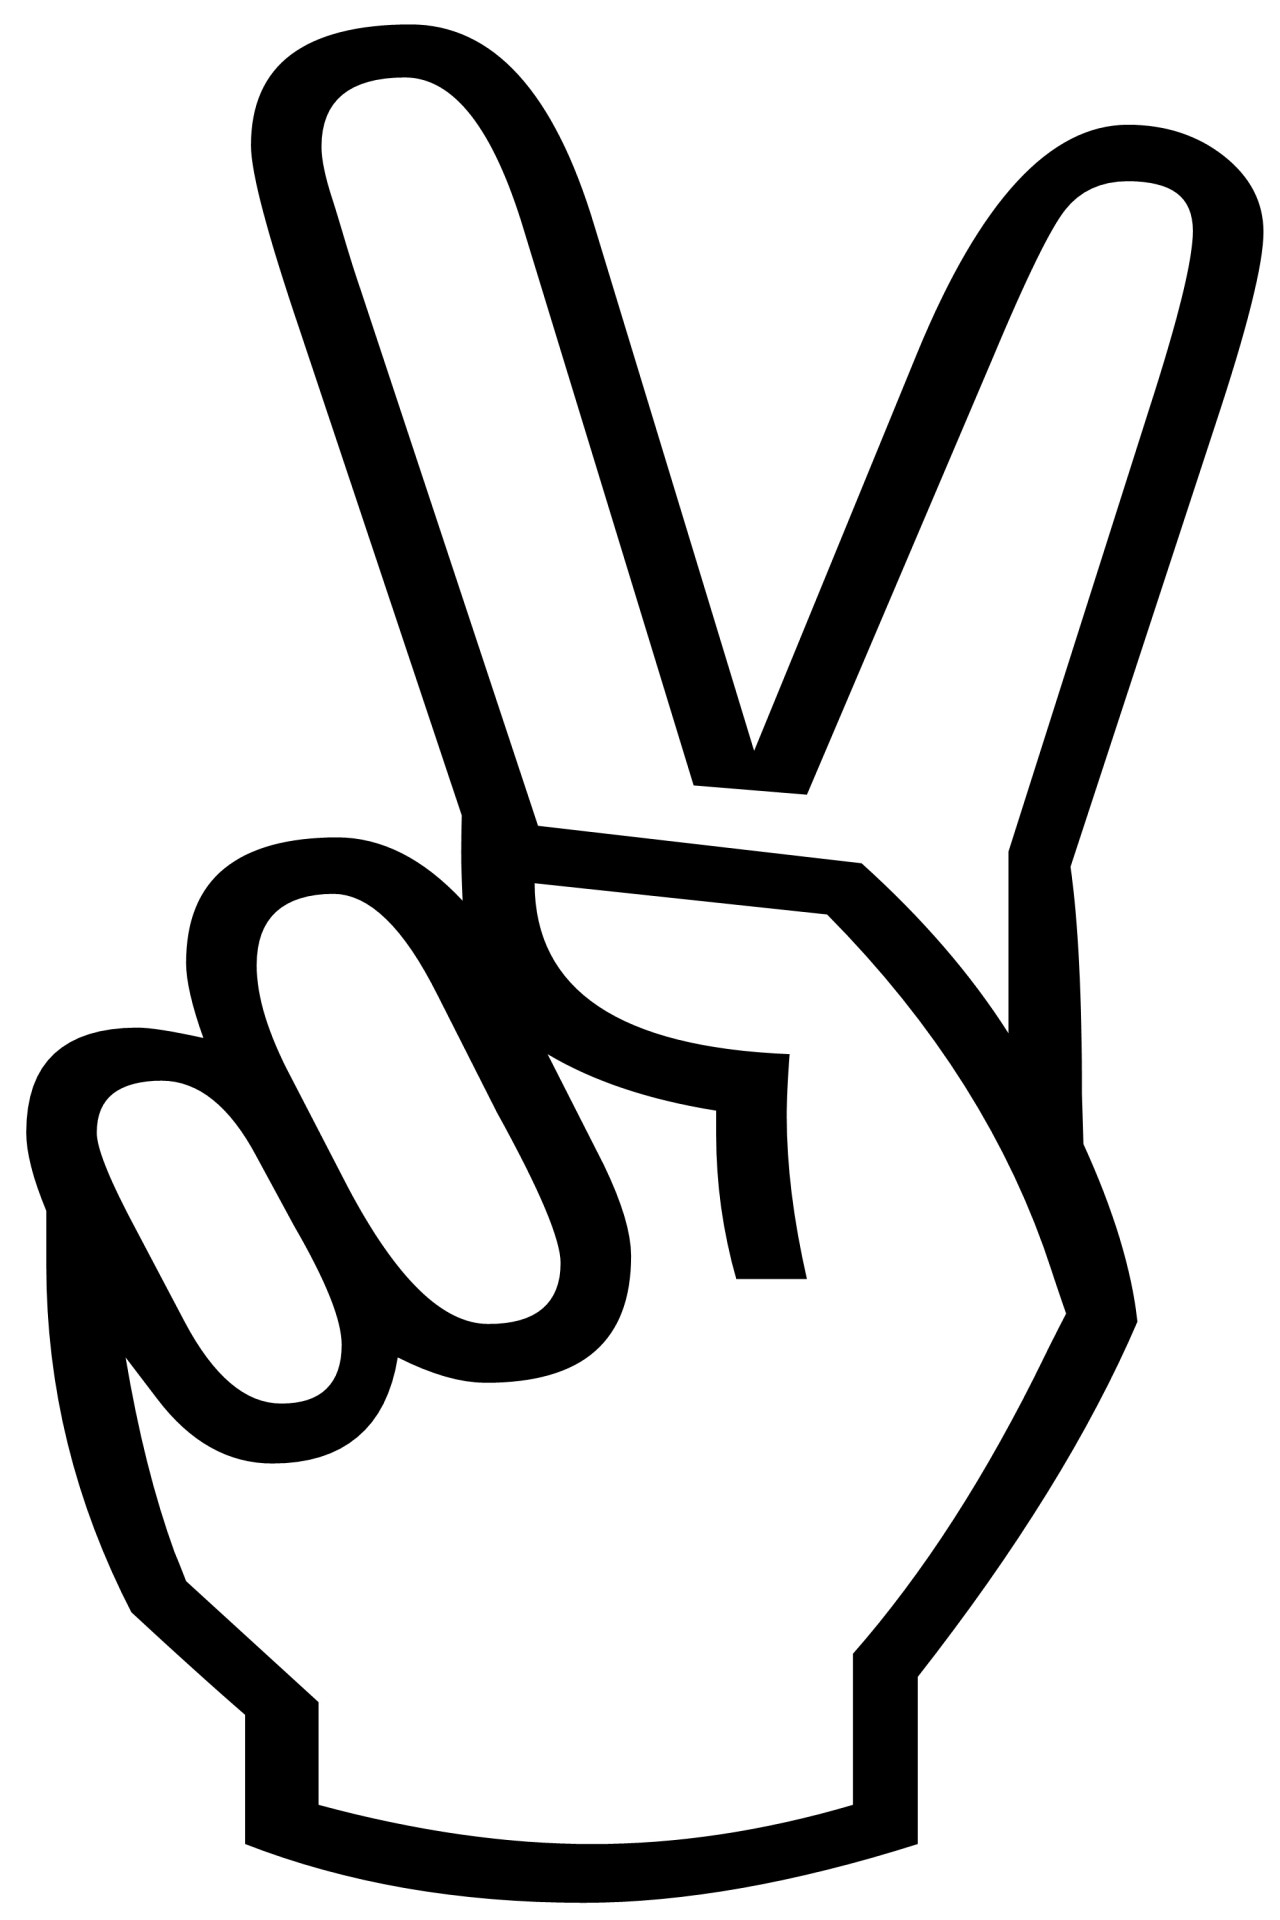 peace sign hand vector